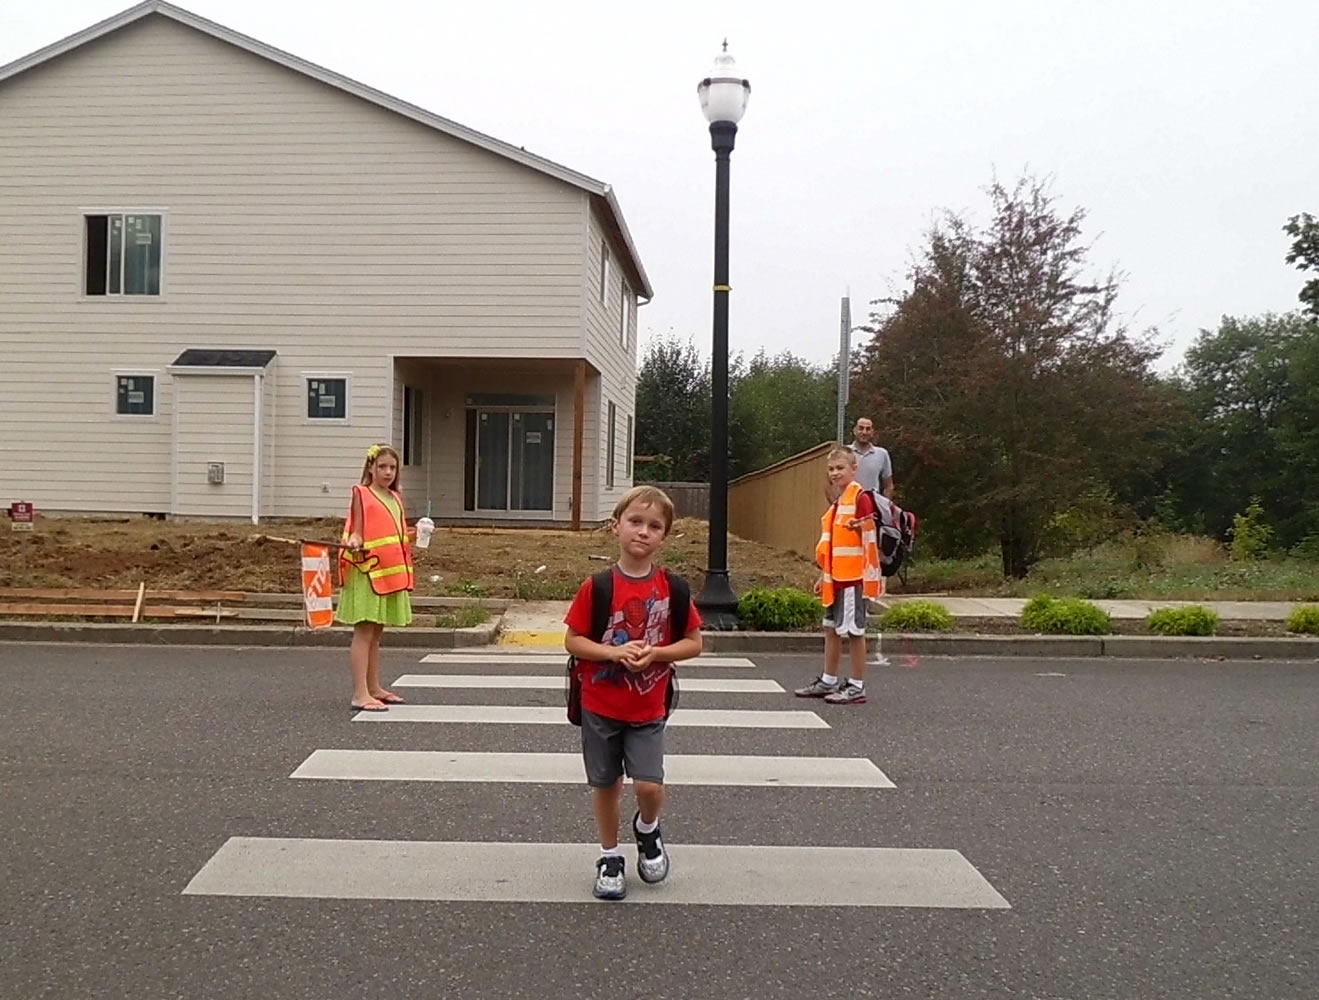 Now that school is in full swing, local law enforcement agencies are urging drivers to be aware of young pedestrians and cyclists on their way to school.